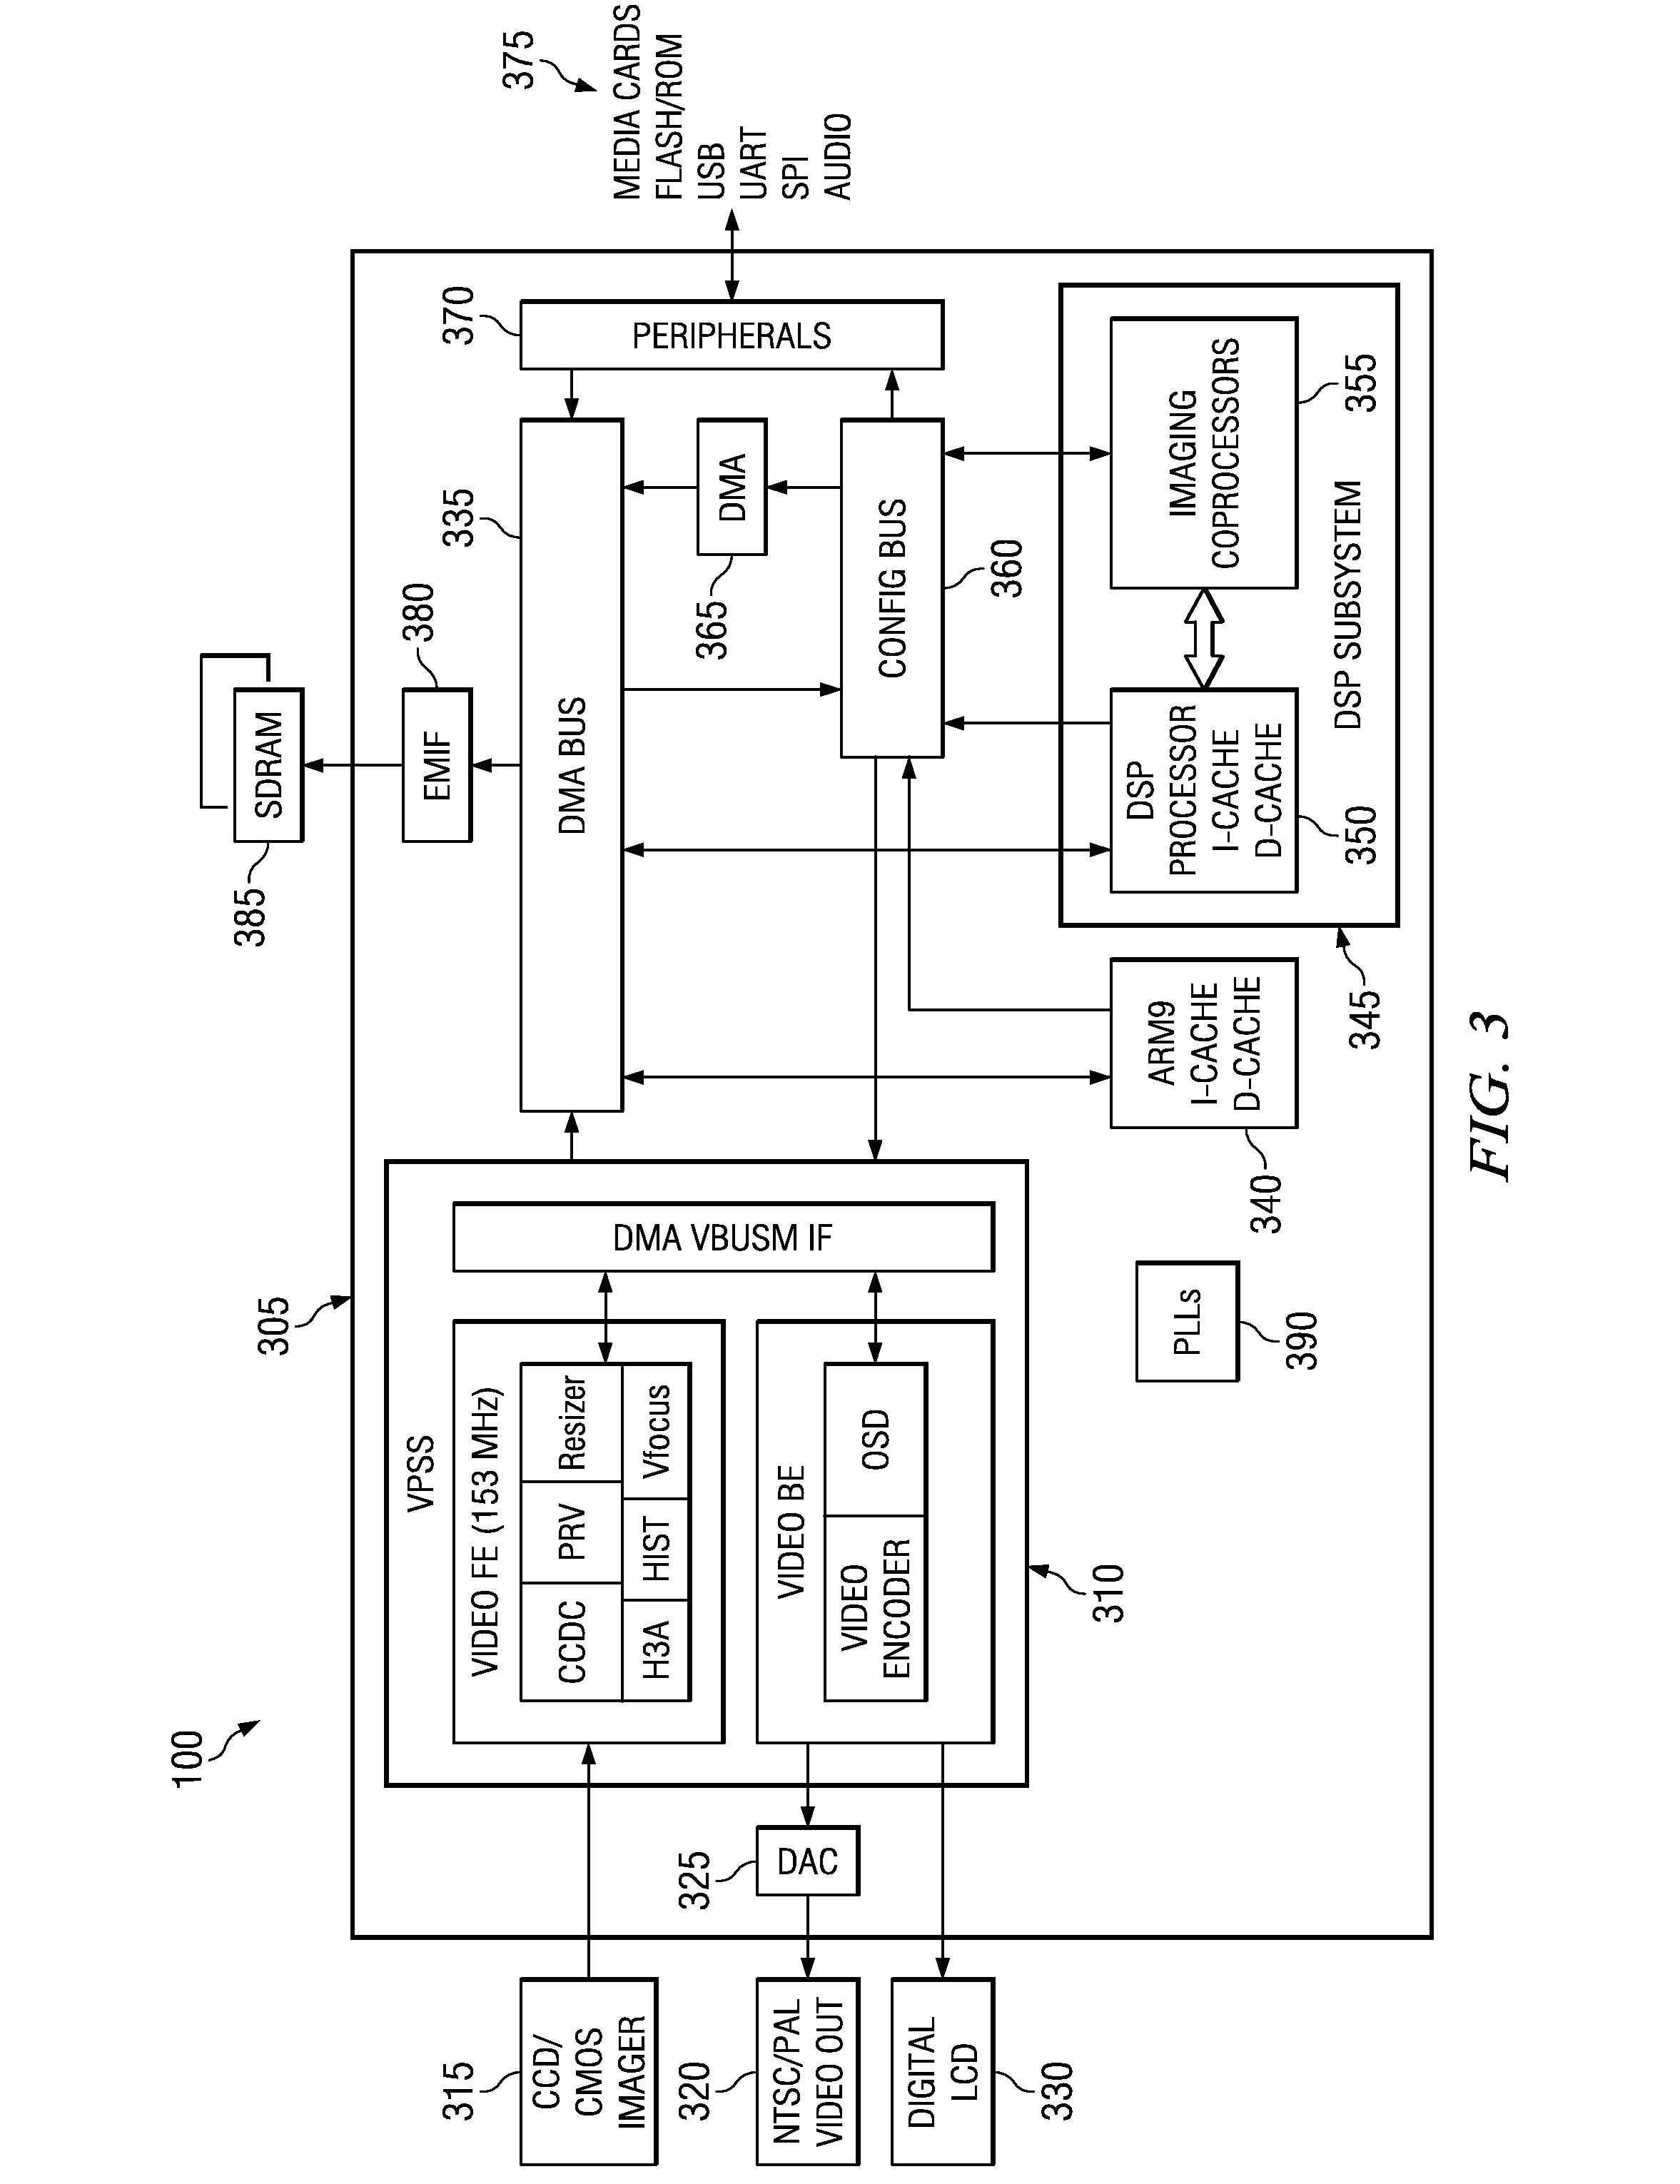 Image Stabilization System and Method for a Digital Camera